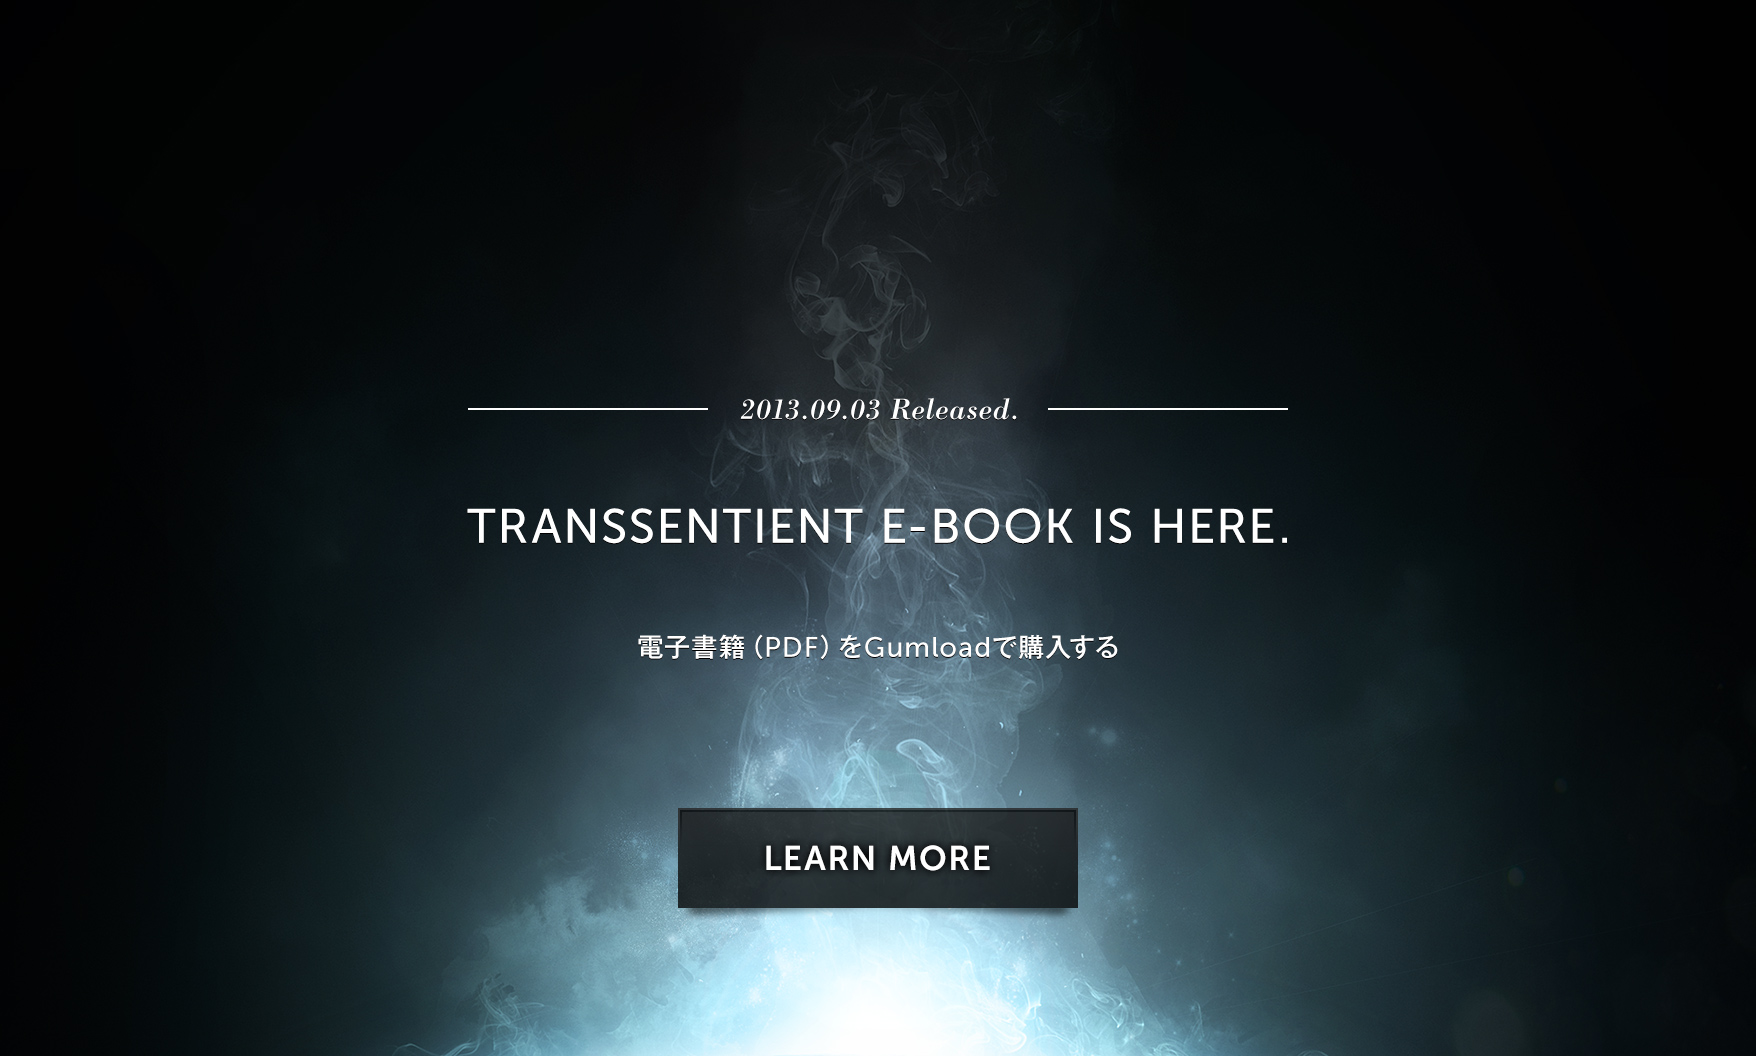 Transsentient E-BOOK is here.